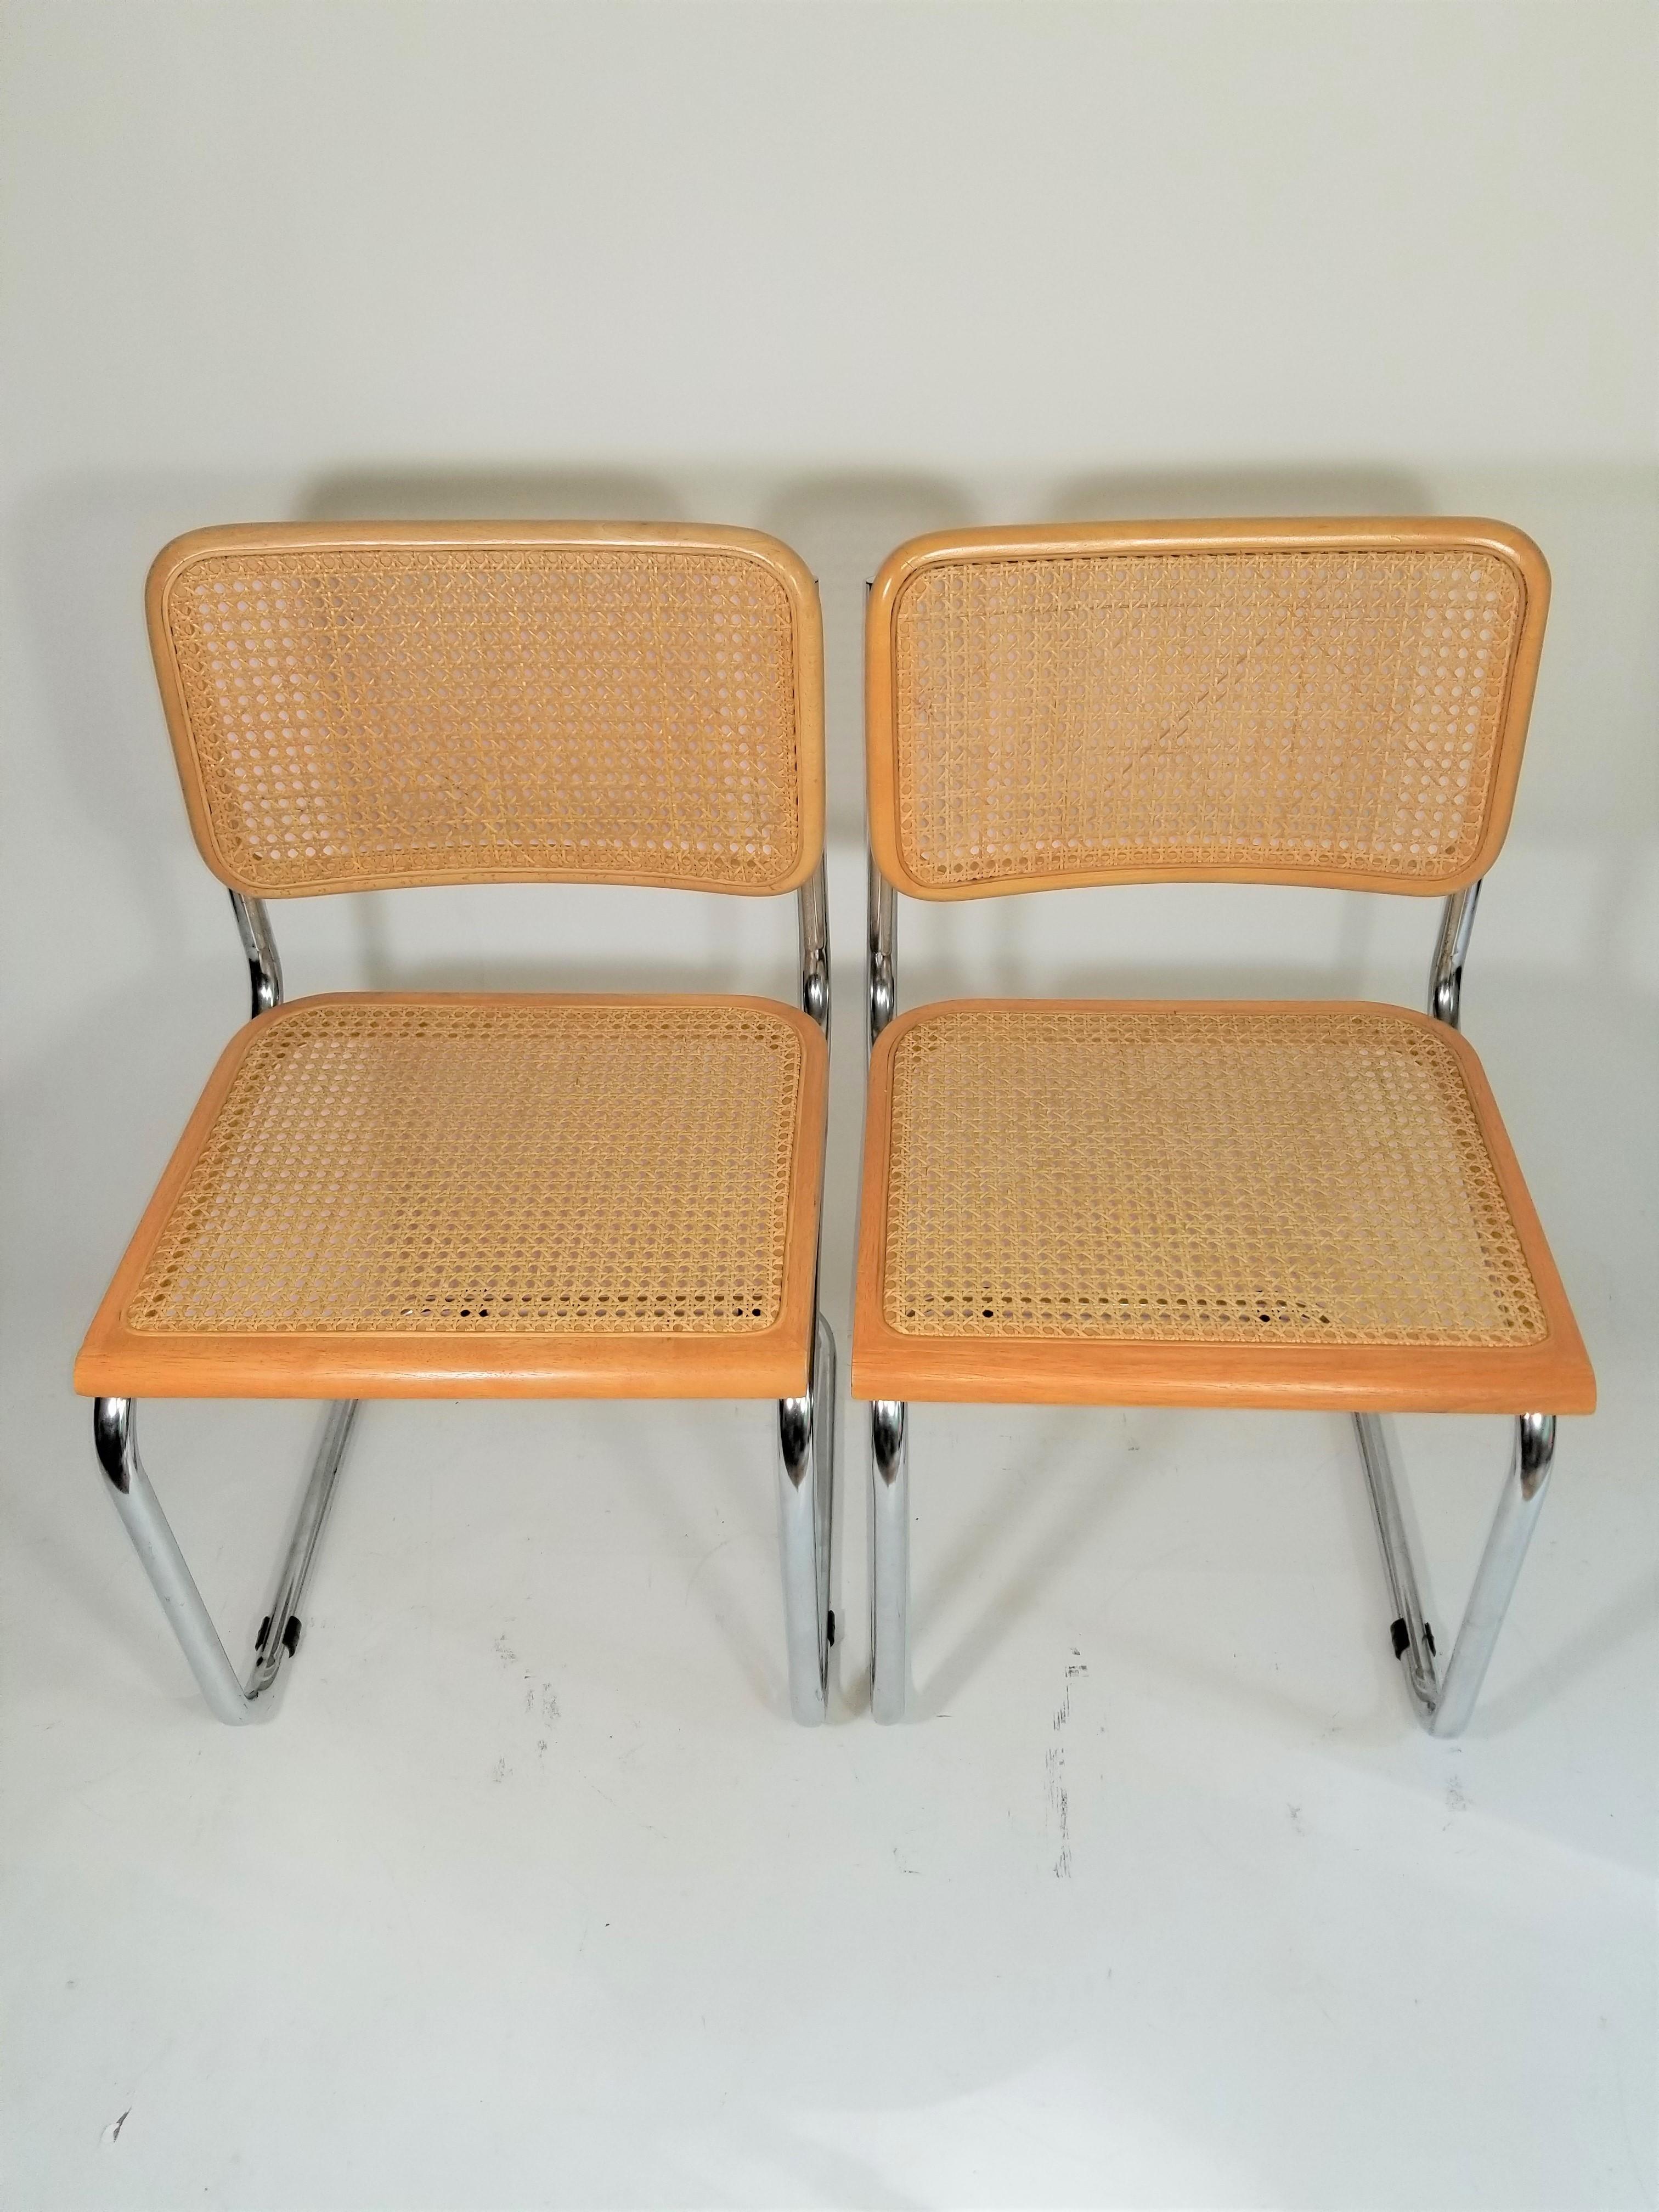 Midcentury pair of Marcel Breuer Cesca side chairs. Cane seats and backs. Classic chrome tubular steel frames.
Complimentary free delivery can me arranged for this item in NYC and surrounding areas.